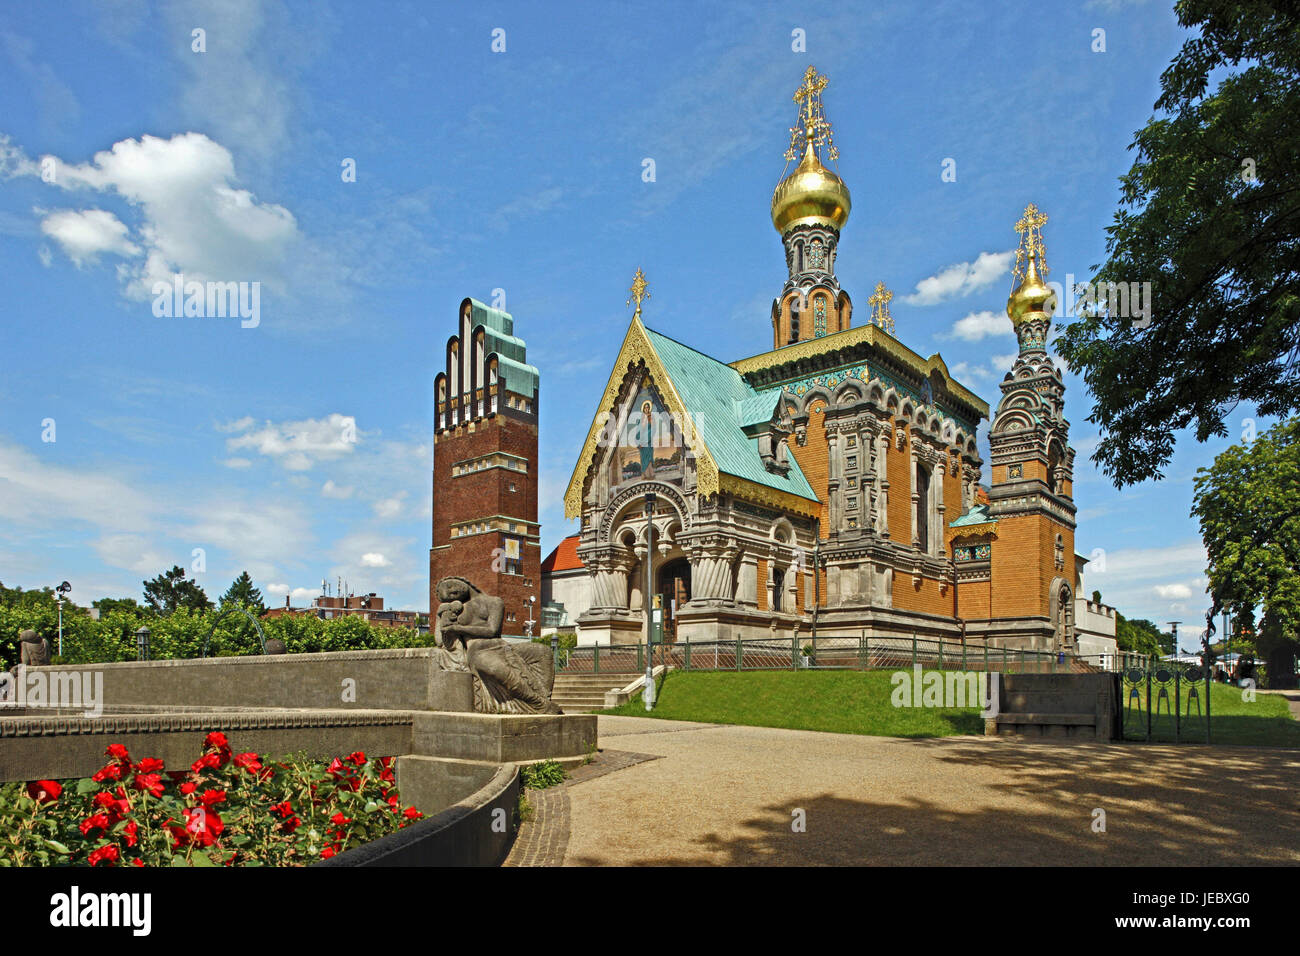 Germany, Hessen, Darmstadt, Mathildenhöhe, Russian band, church, religion, faith, band, church, outside, steeples, golden, wedding attack, nobody, place of interest, tourism, sunshine, Stock Photo